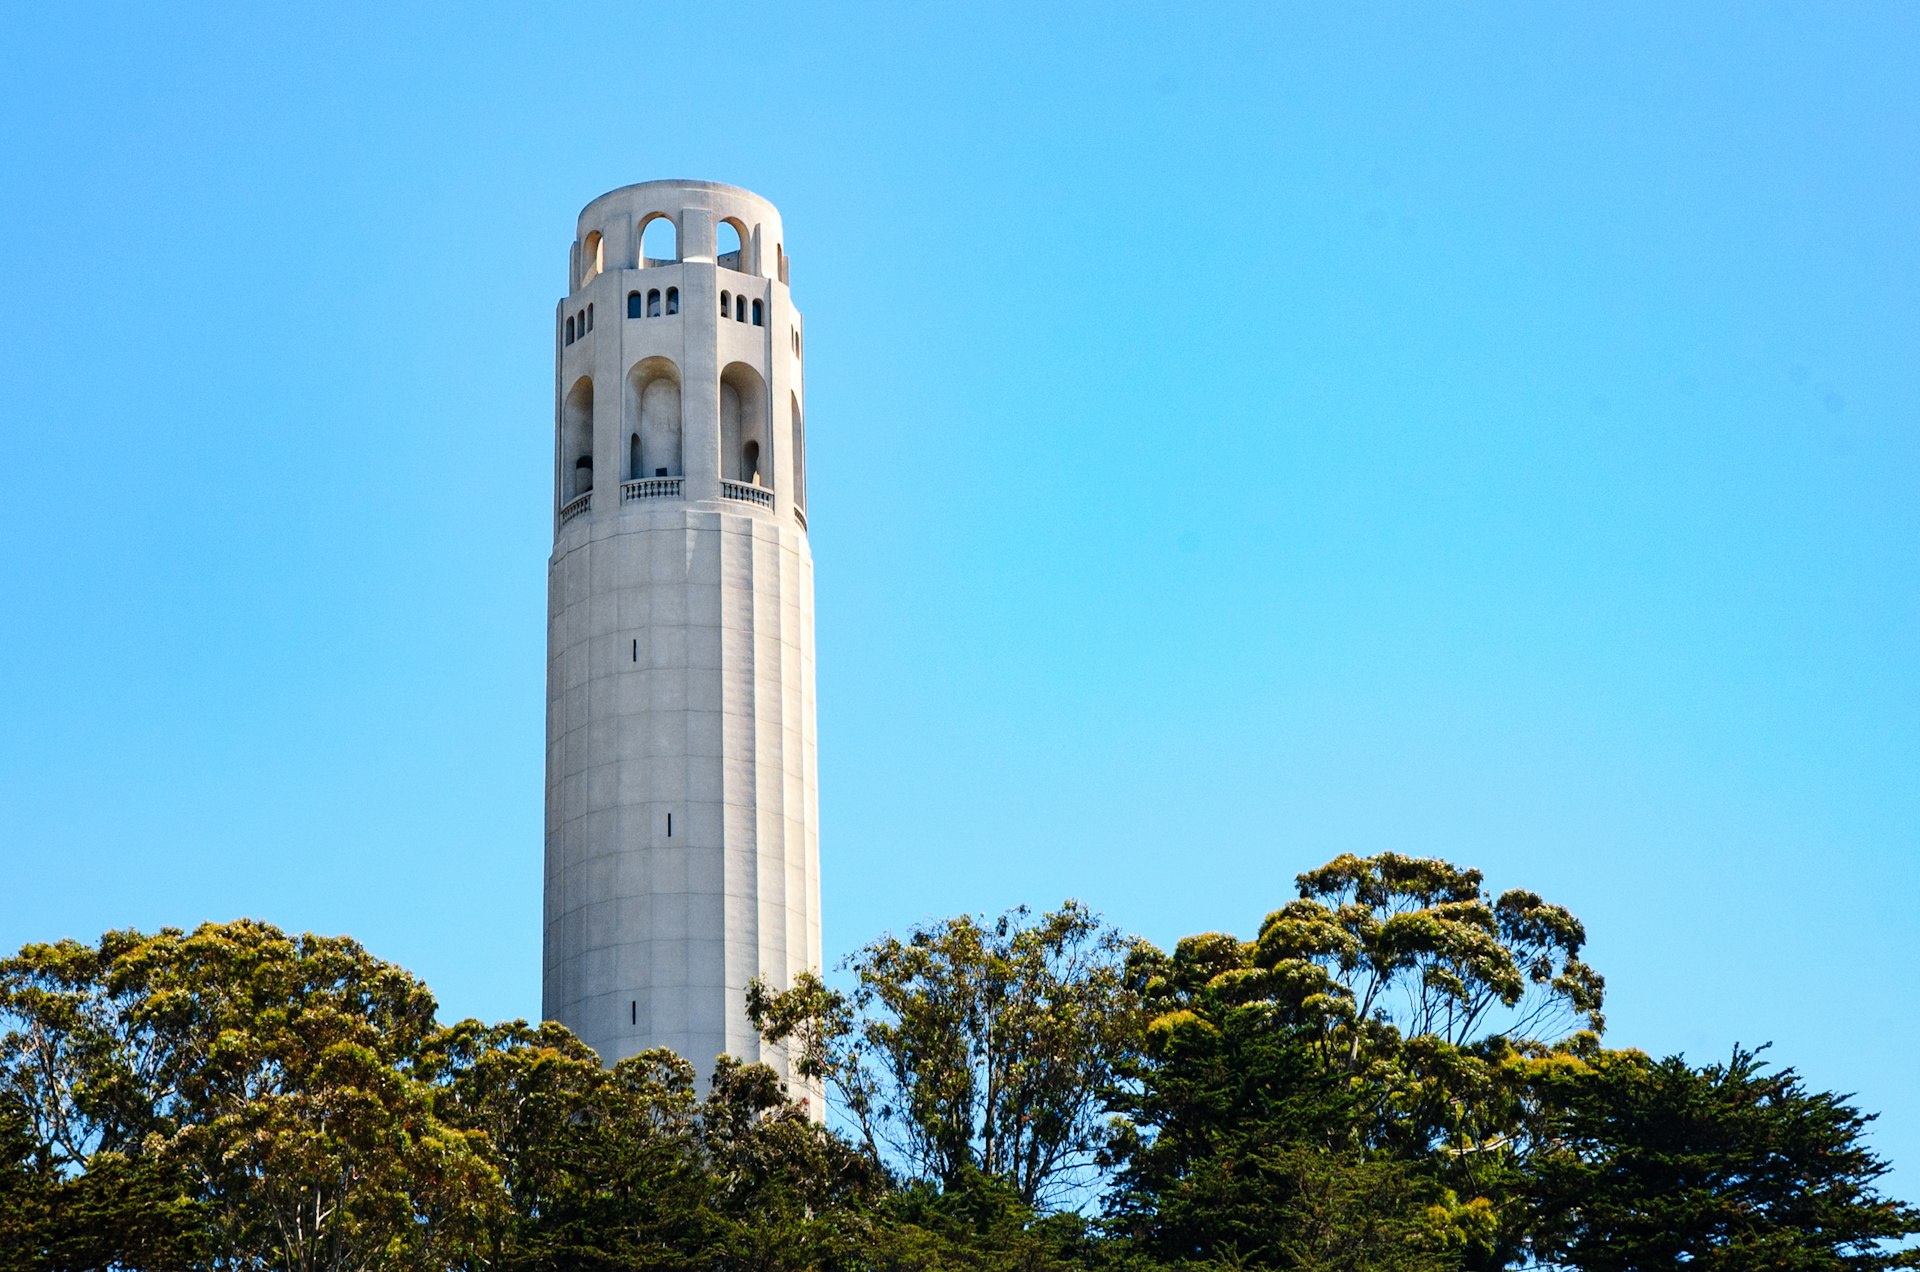 A view of Coit Tower against a blue sky